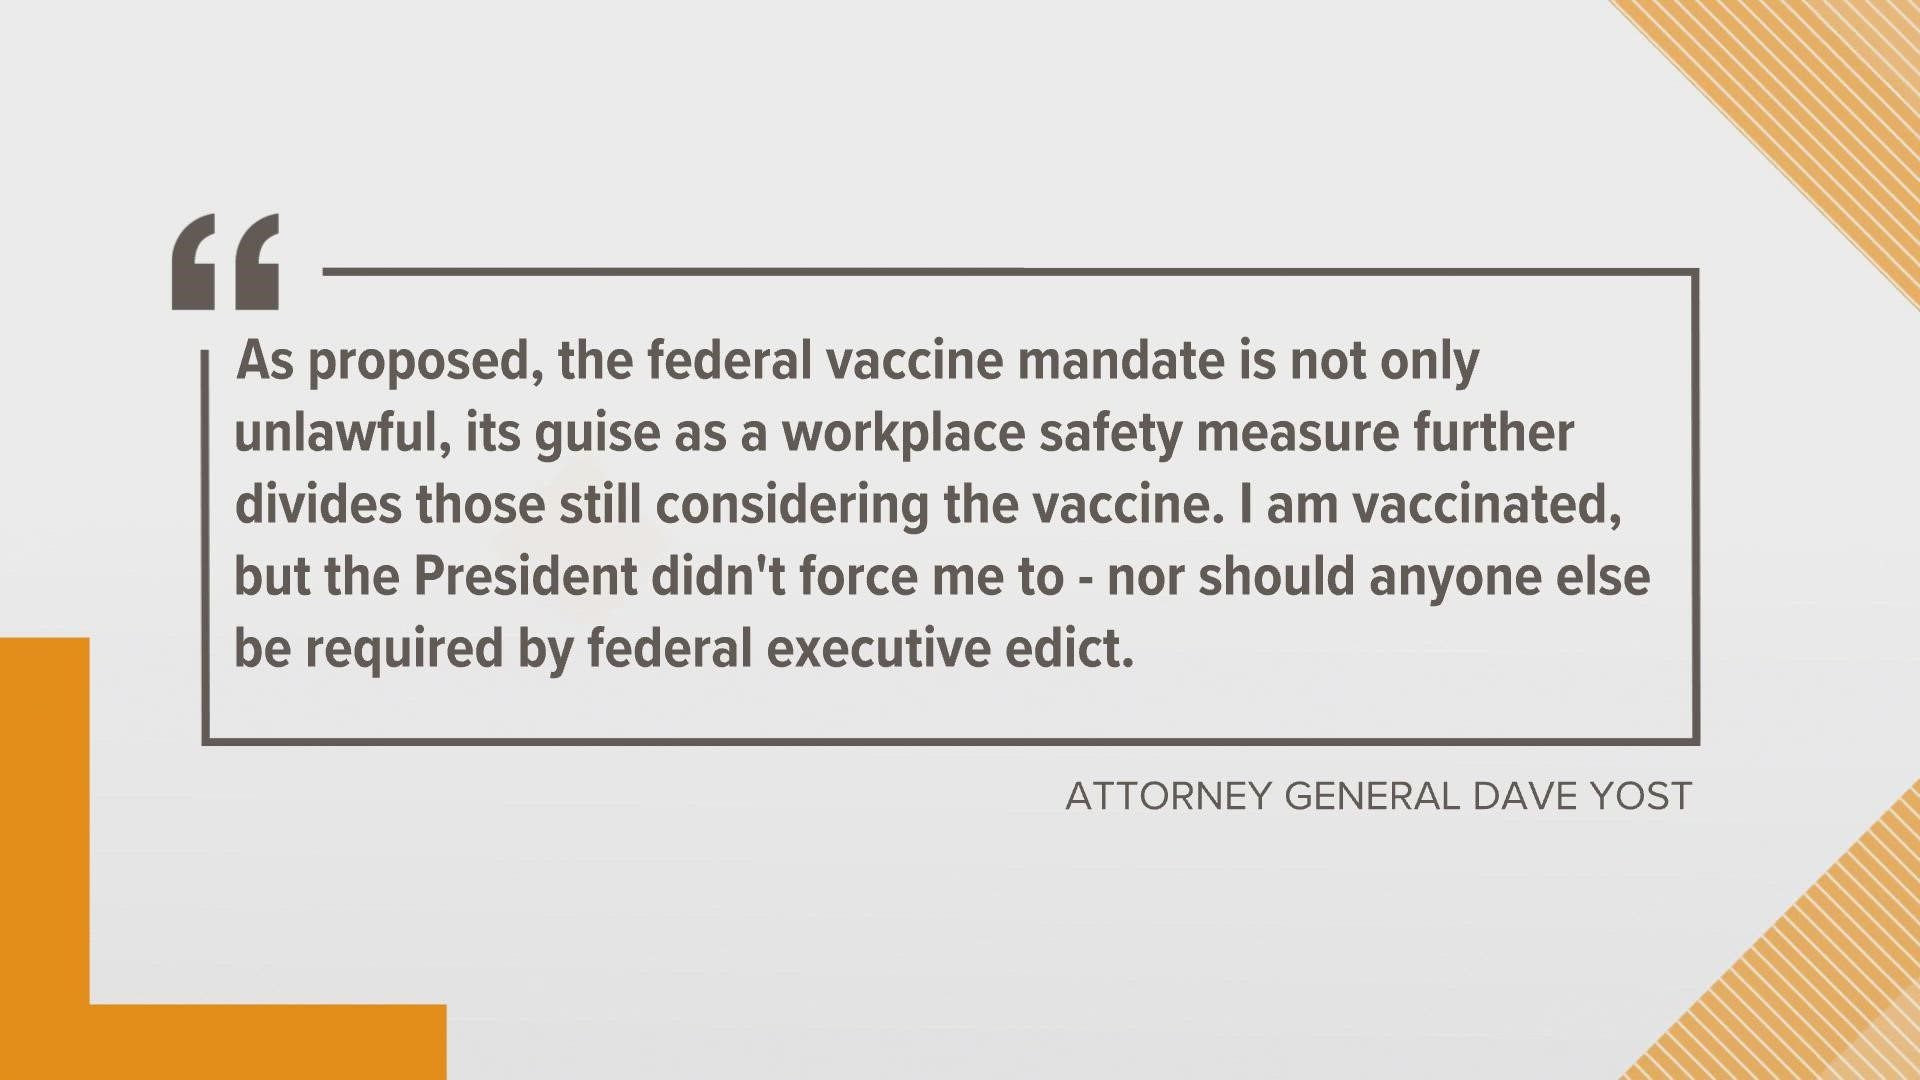 Ohio Attorney General Dave Yost has joined 23 other attorneys general nationwide in demanding President Joe Biden drop a recently announced vaccine mandate.